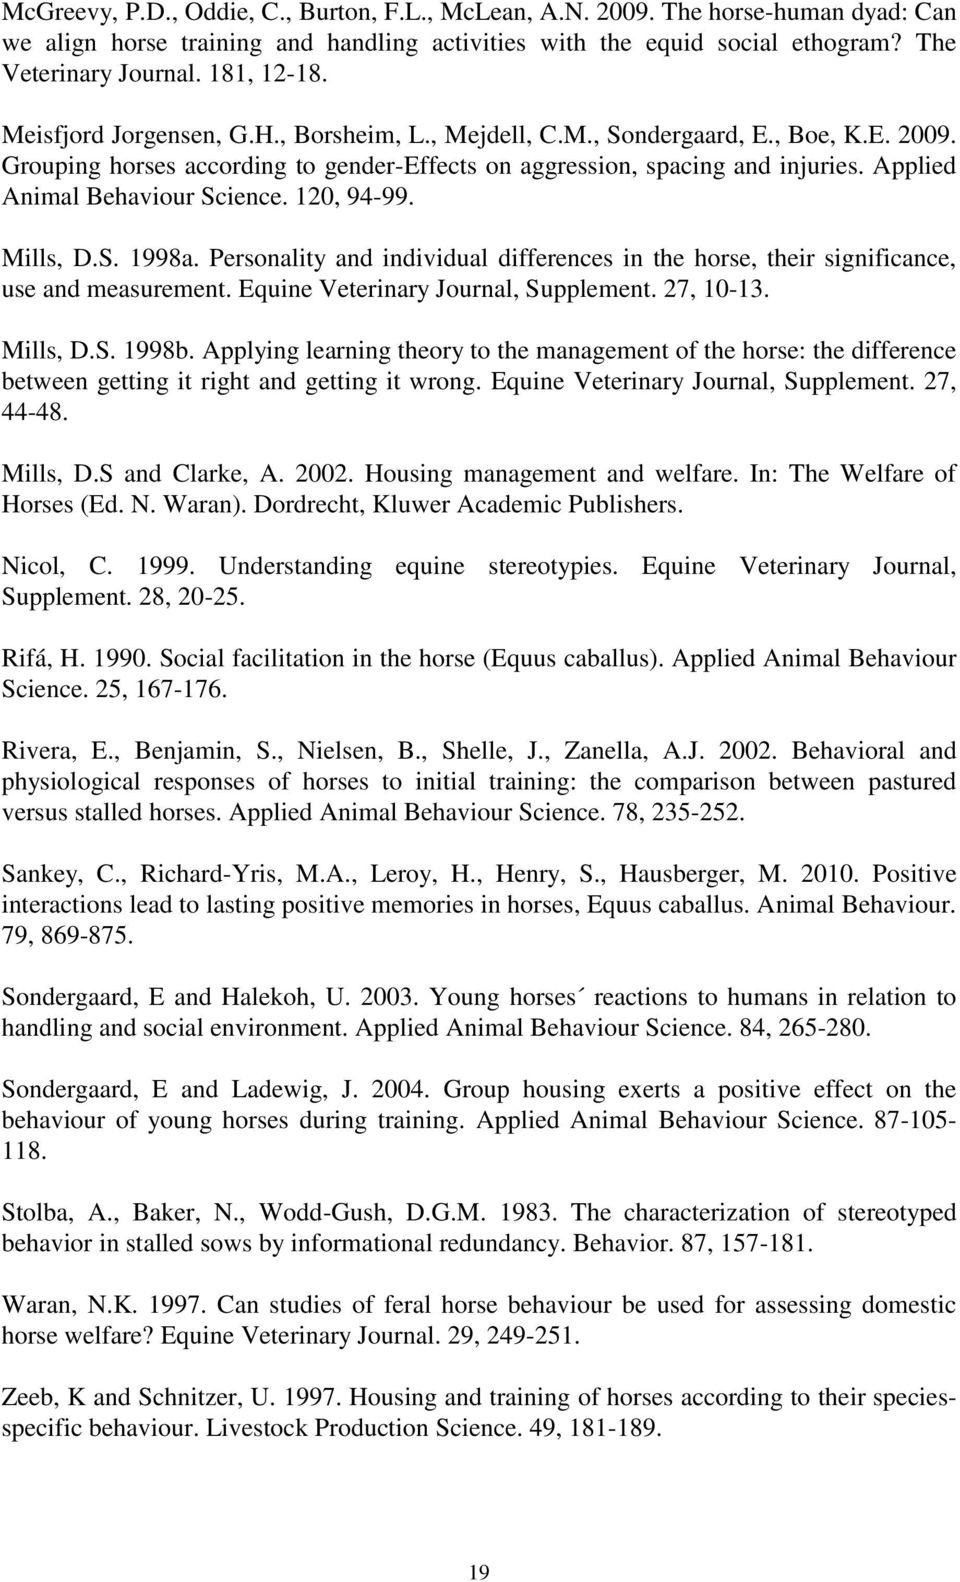 Applied Animal Behaviour Science. 120, 94-99. Mills, D.S. 1998a. Personality and individual differences in the horse, their significance, use and measurement. Equine Veterinary Journal, Supplement.